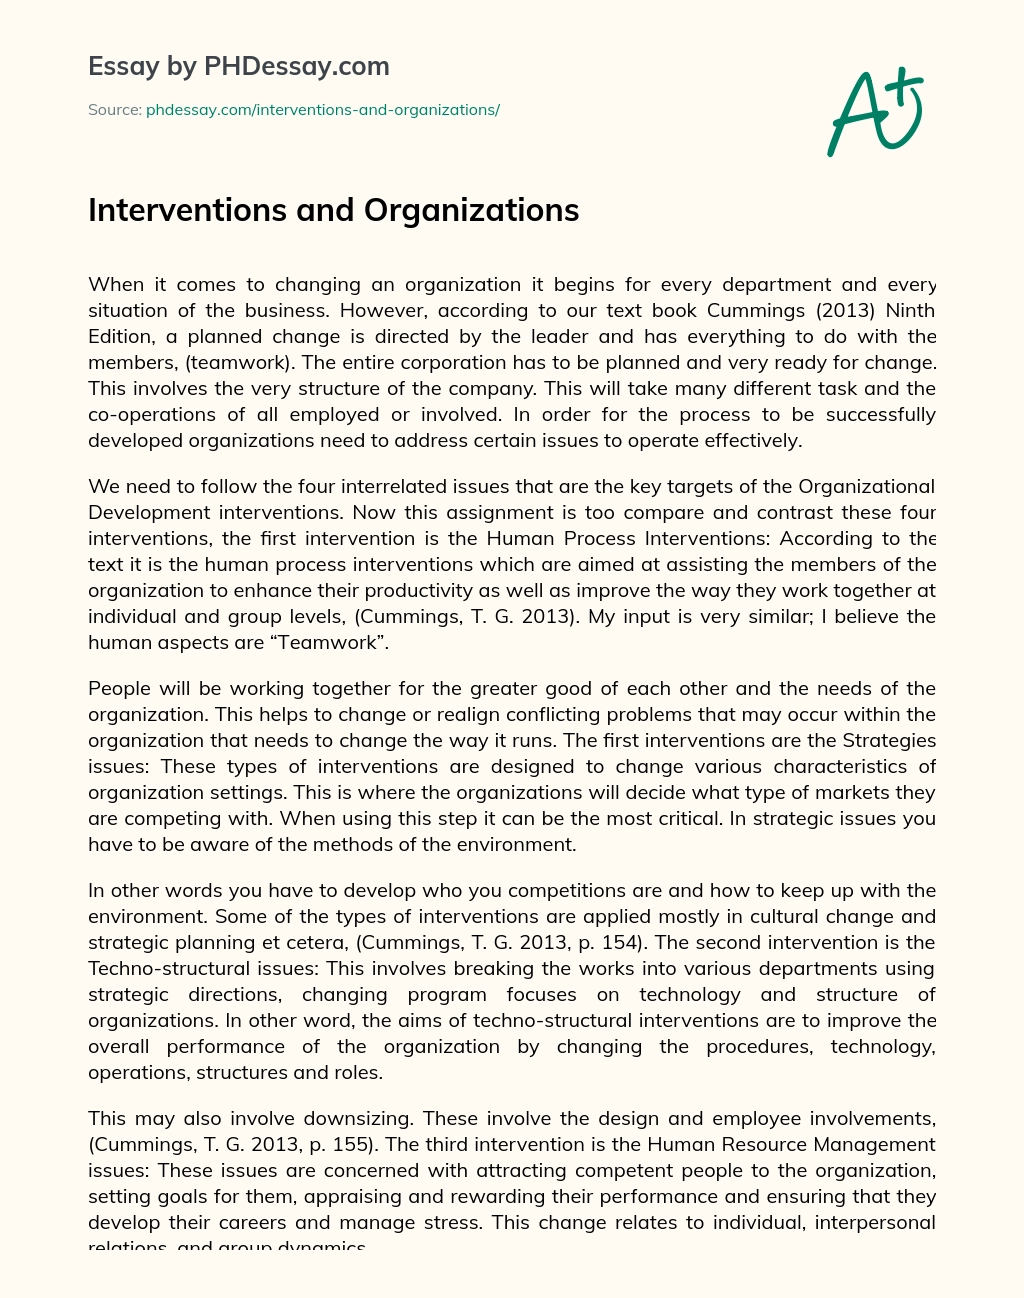 Interventions and Organizations essay